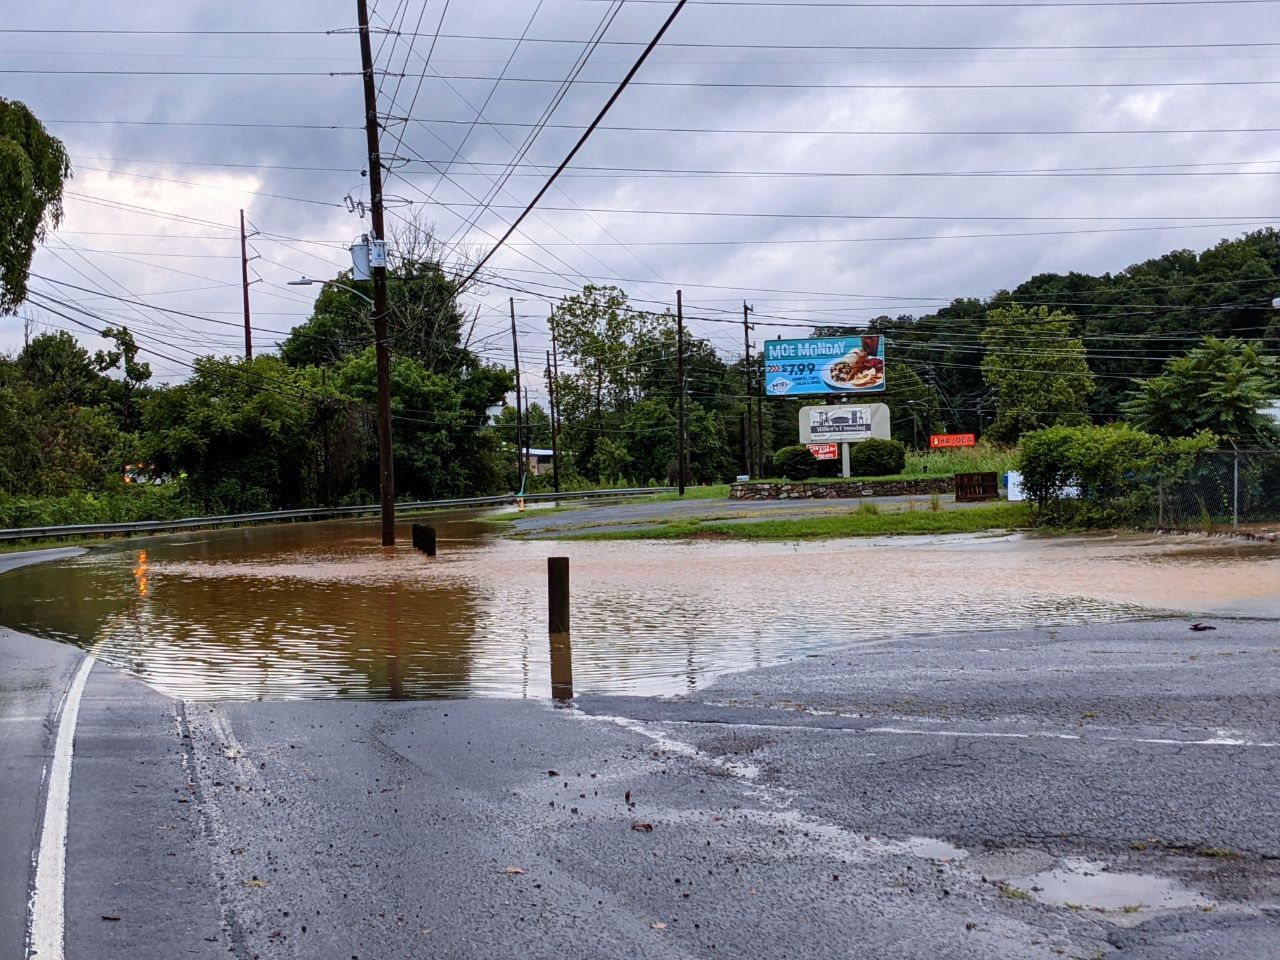 Road bends around a curve, water is flowing over the road and a parking lot beside the road. A billboard in the background reads “Moe Monday” with a burrito advertisement